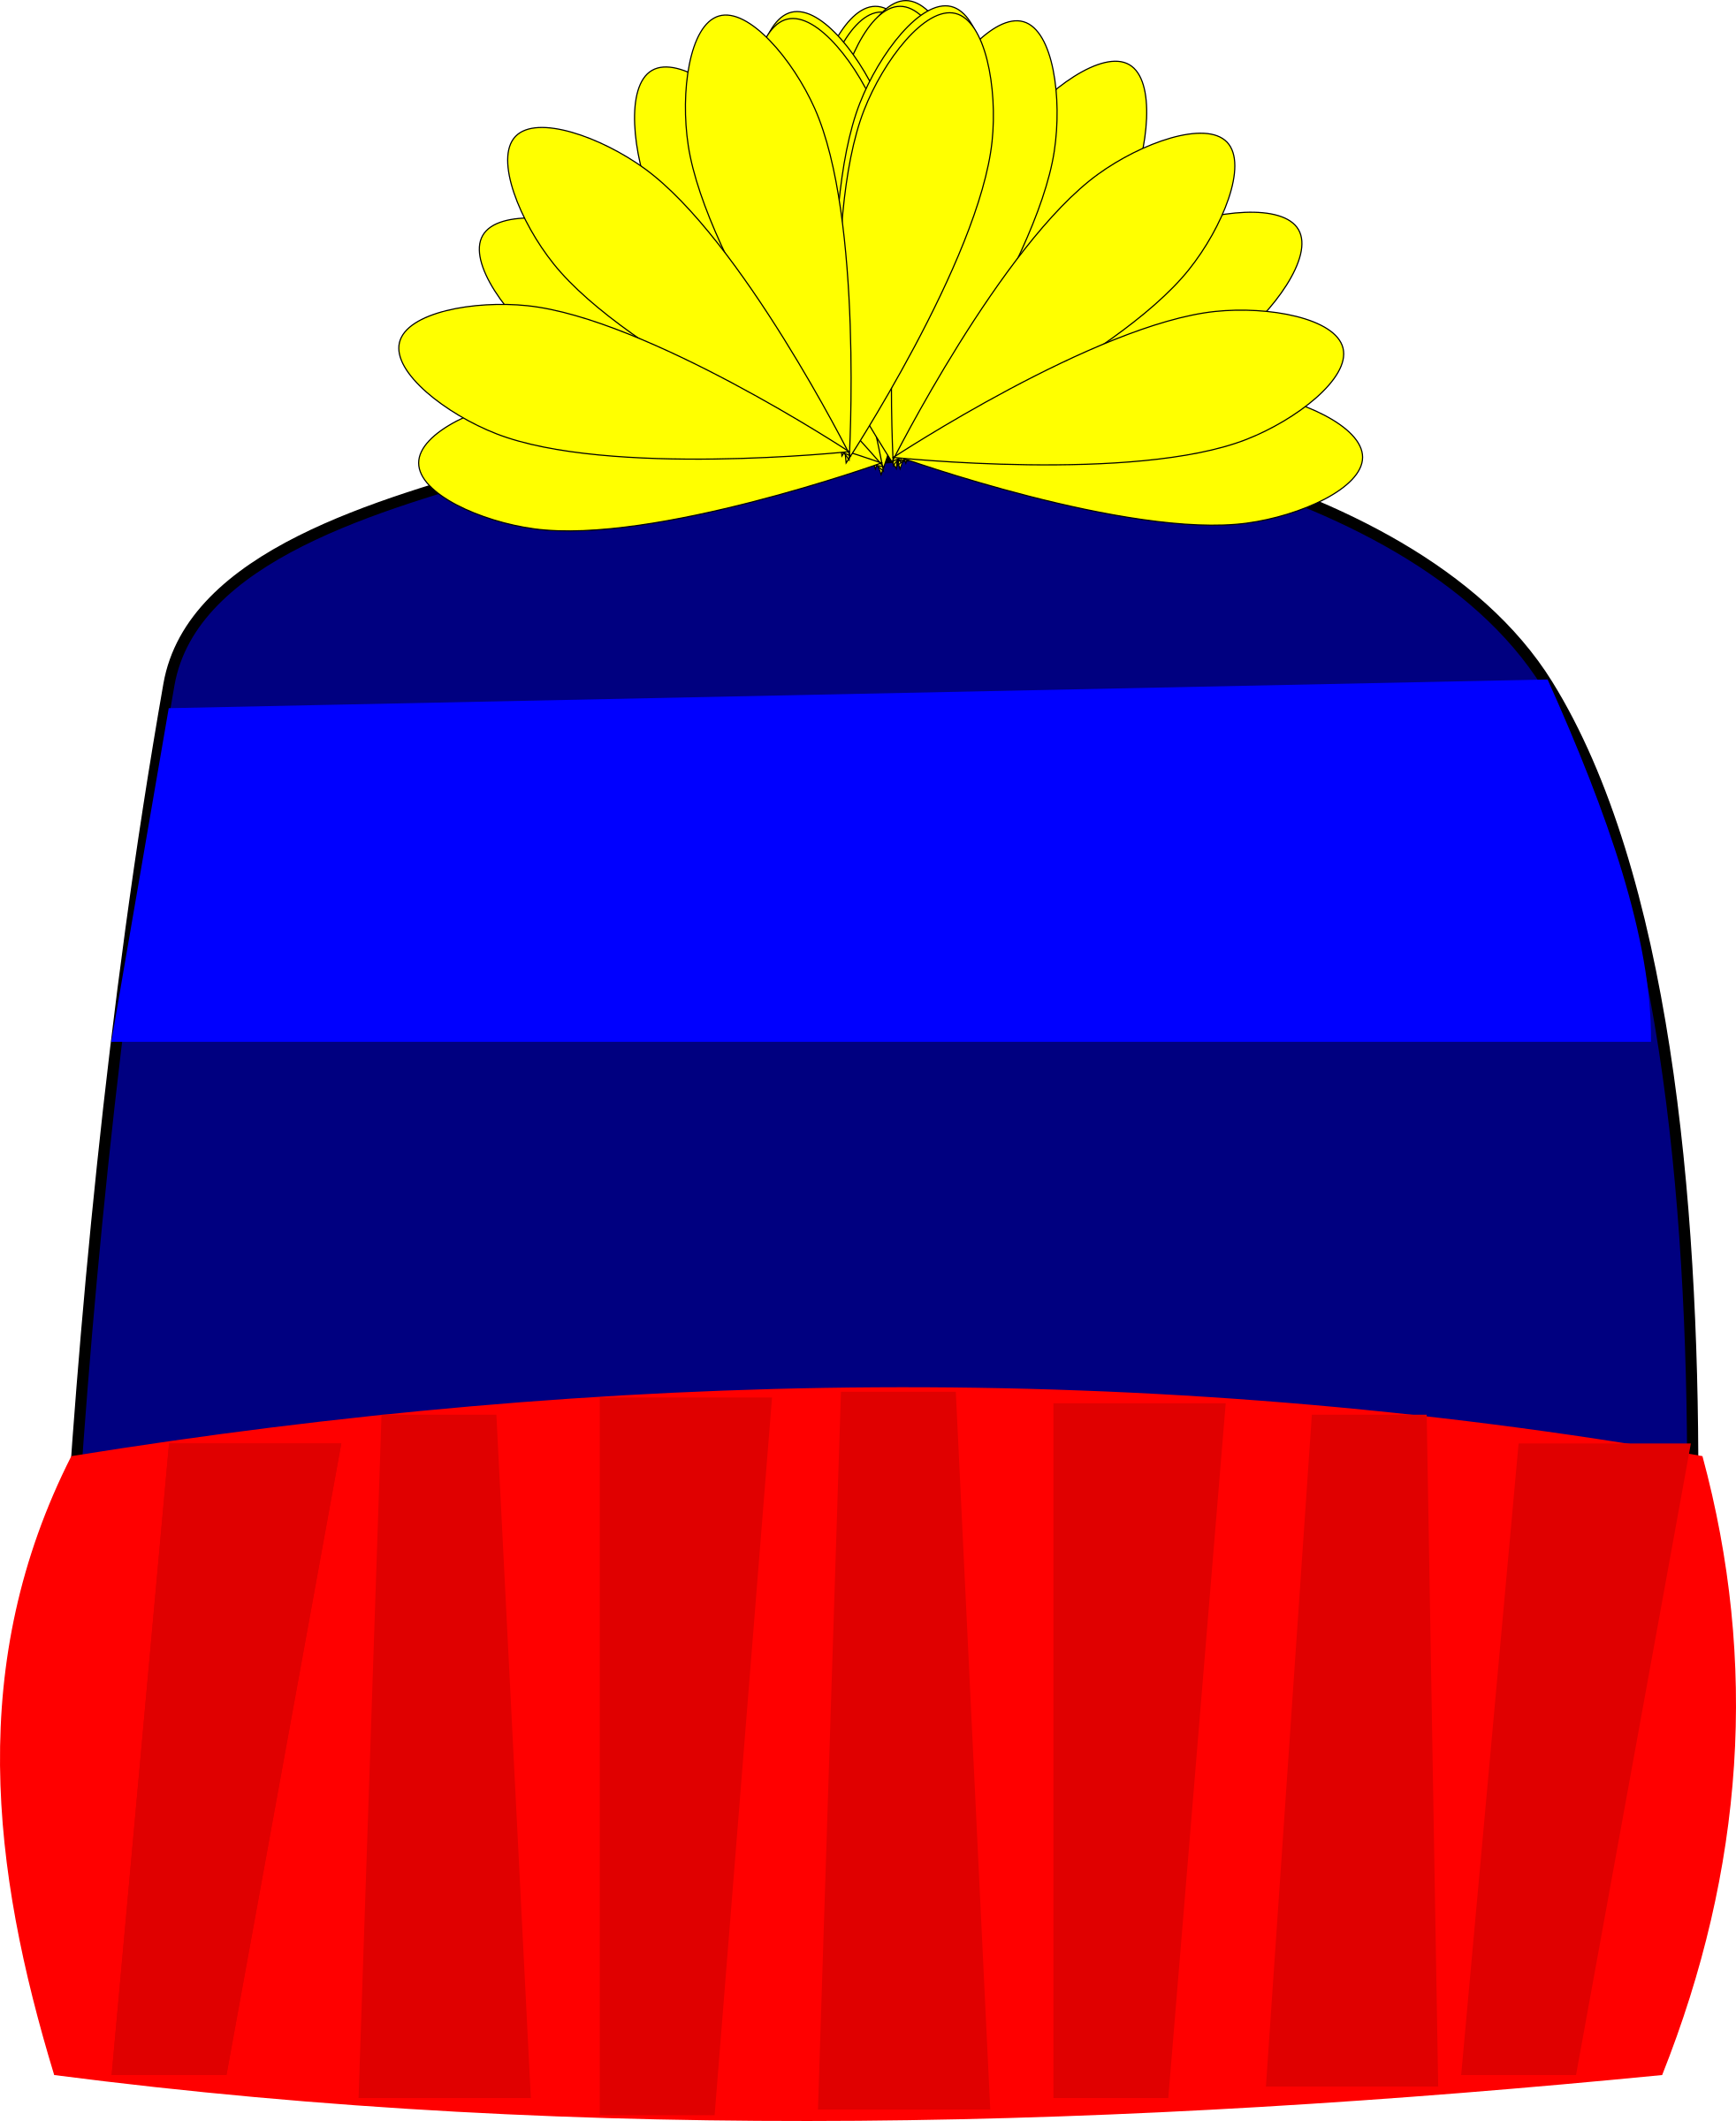 wooly hat clipart - photo #16